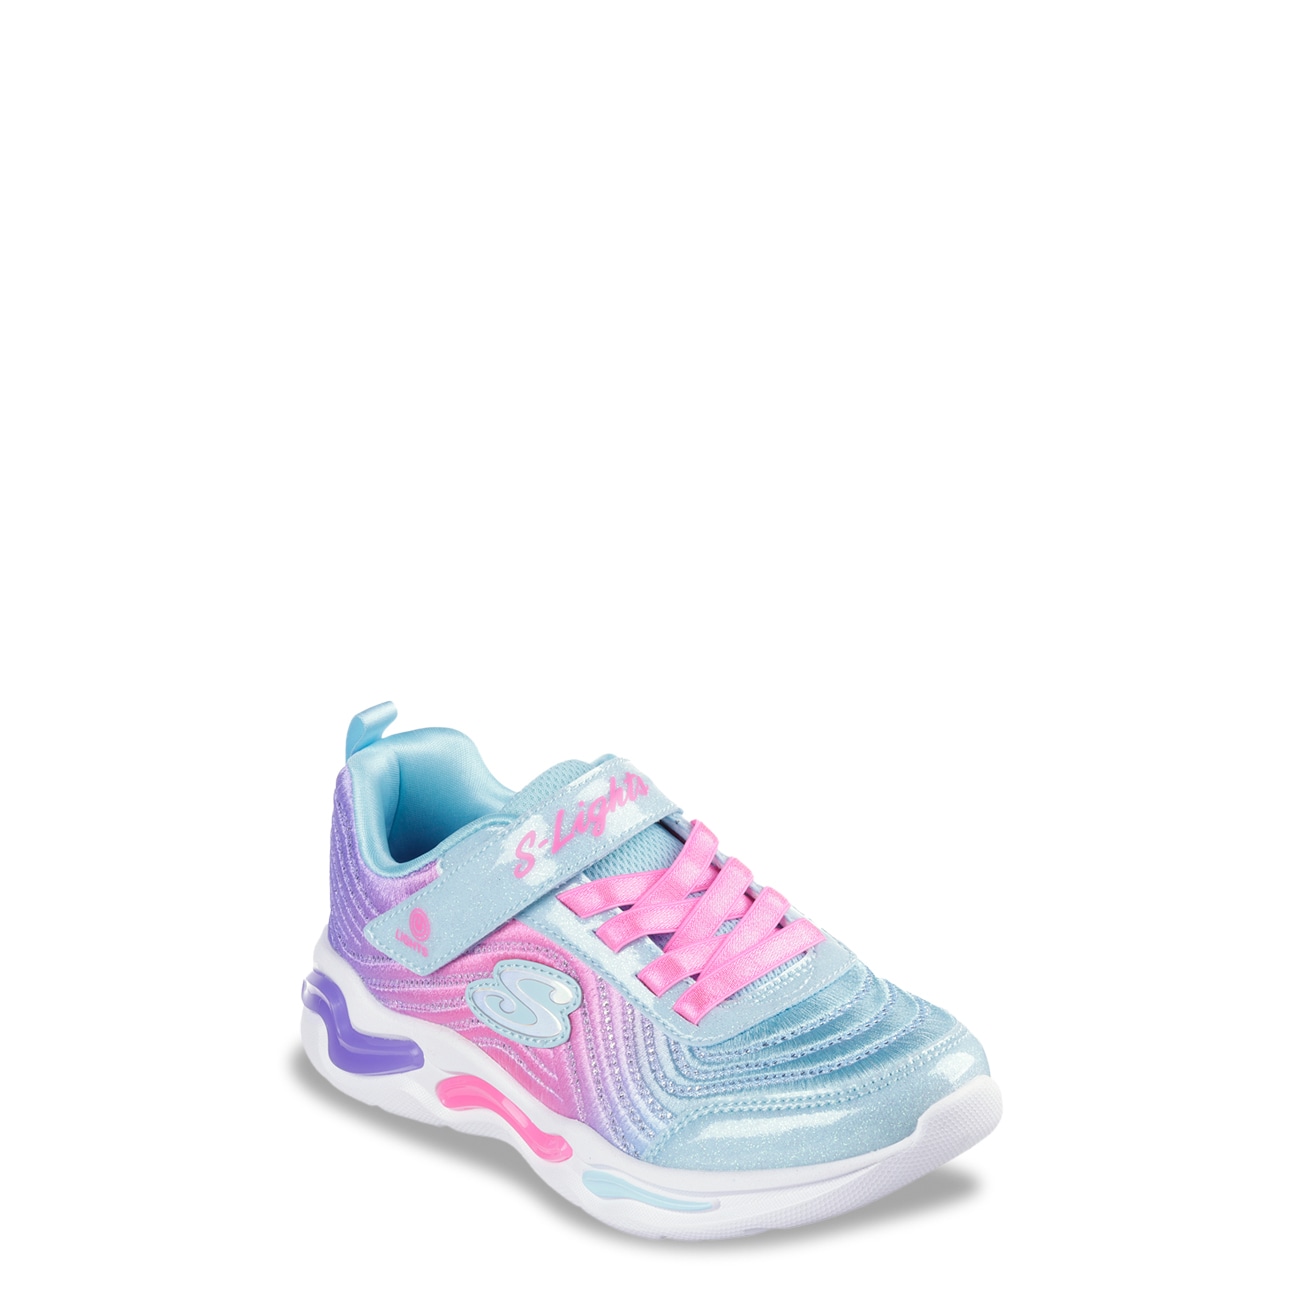 Youth Girls' S-Lights®: Wavy Beams - Ombre Express Sneaker